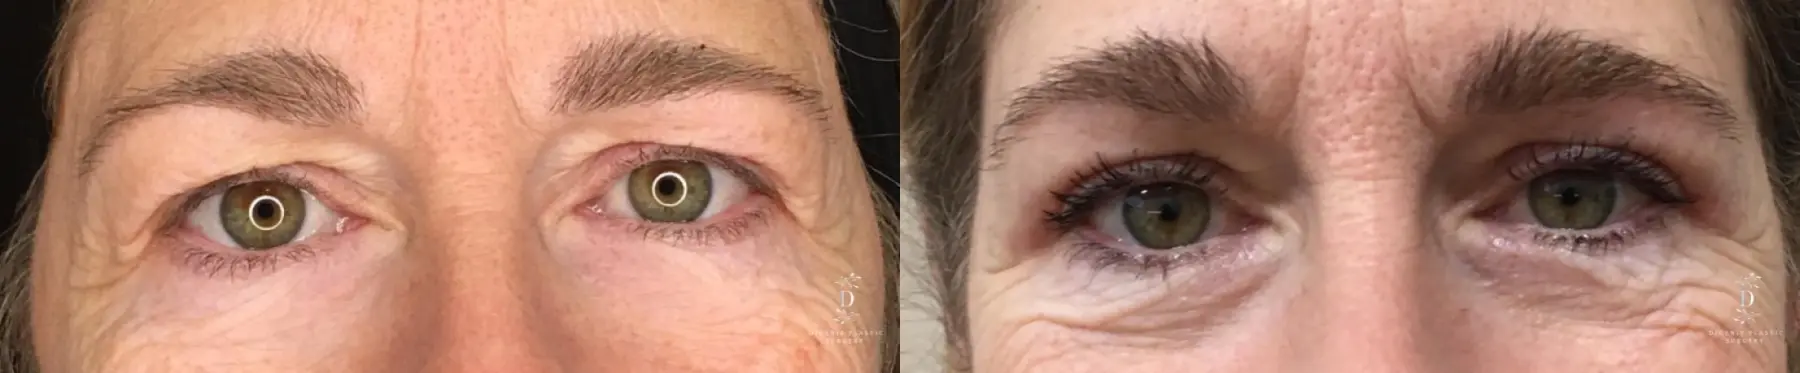 Eyelid Surgery: Patient 32 - Before and After 1